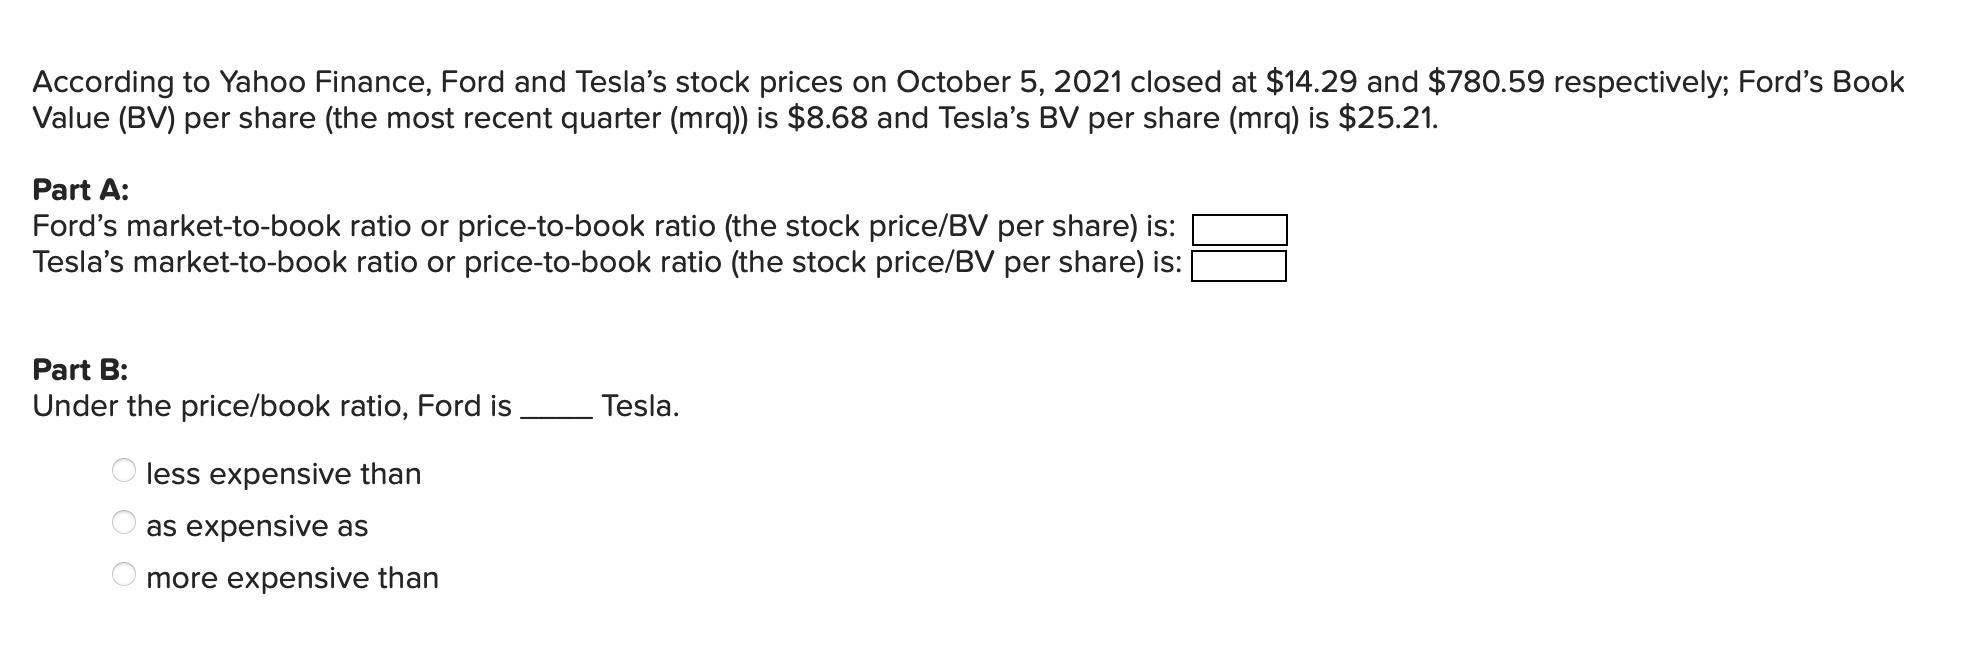 According to Yahoo Finance, Ford and Tesla's stock prices on October 5, 2021 closed at $14.29 and $780.59